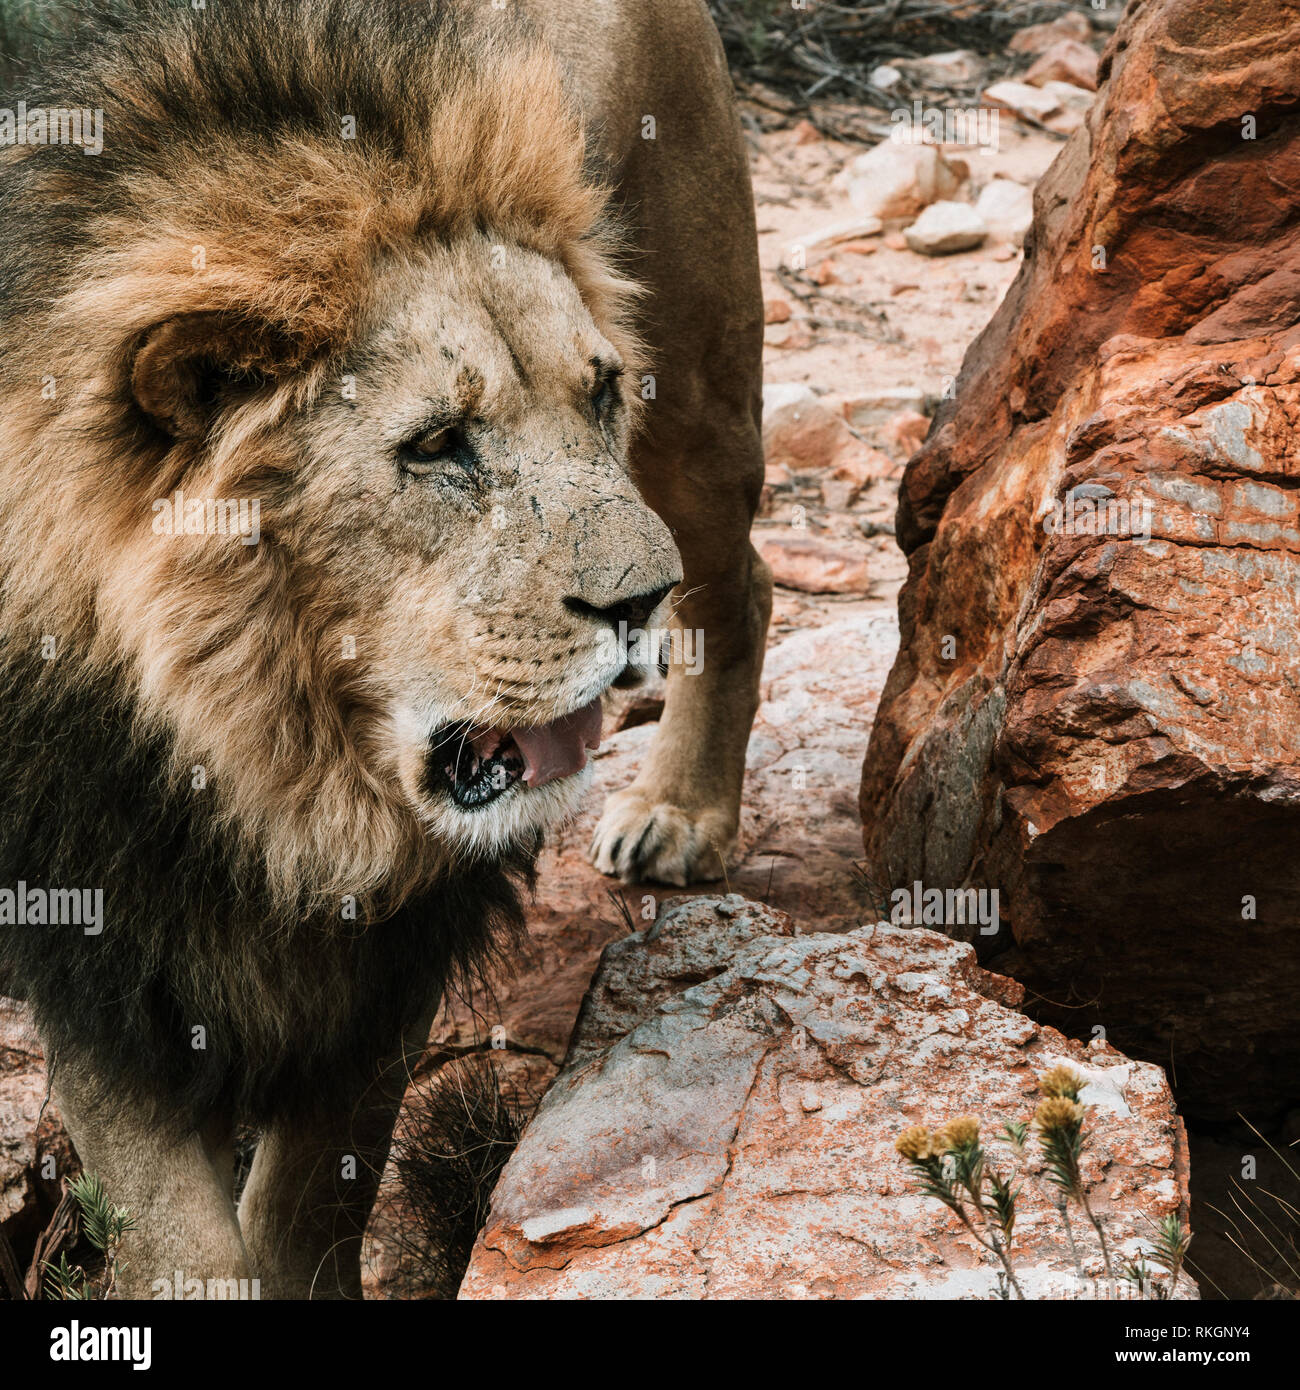 A Lion standing next to a rock to get an overview while strawling through the savannah Stock Photo